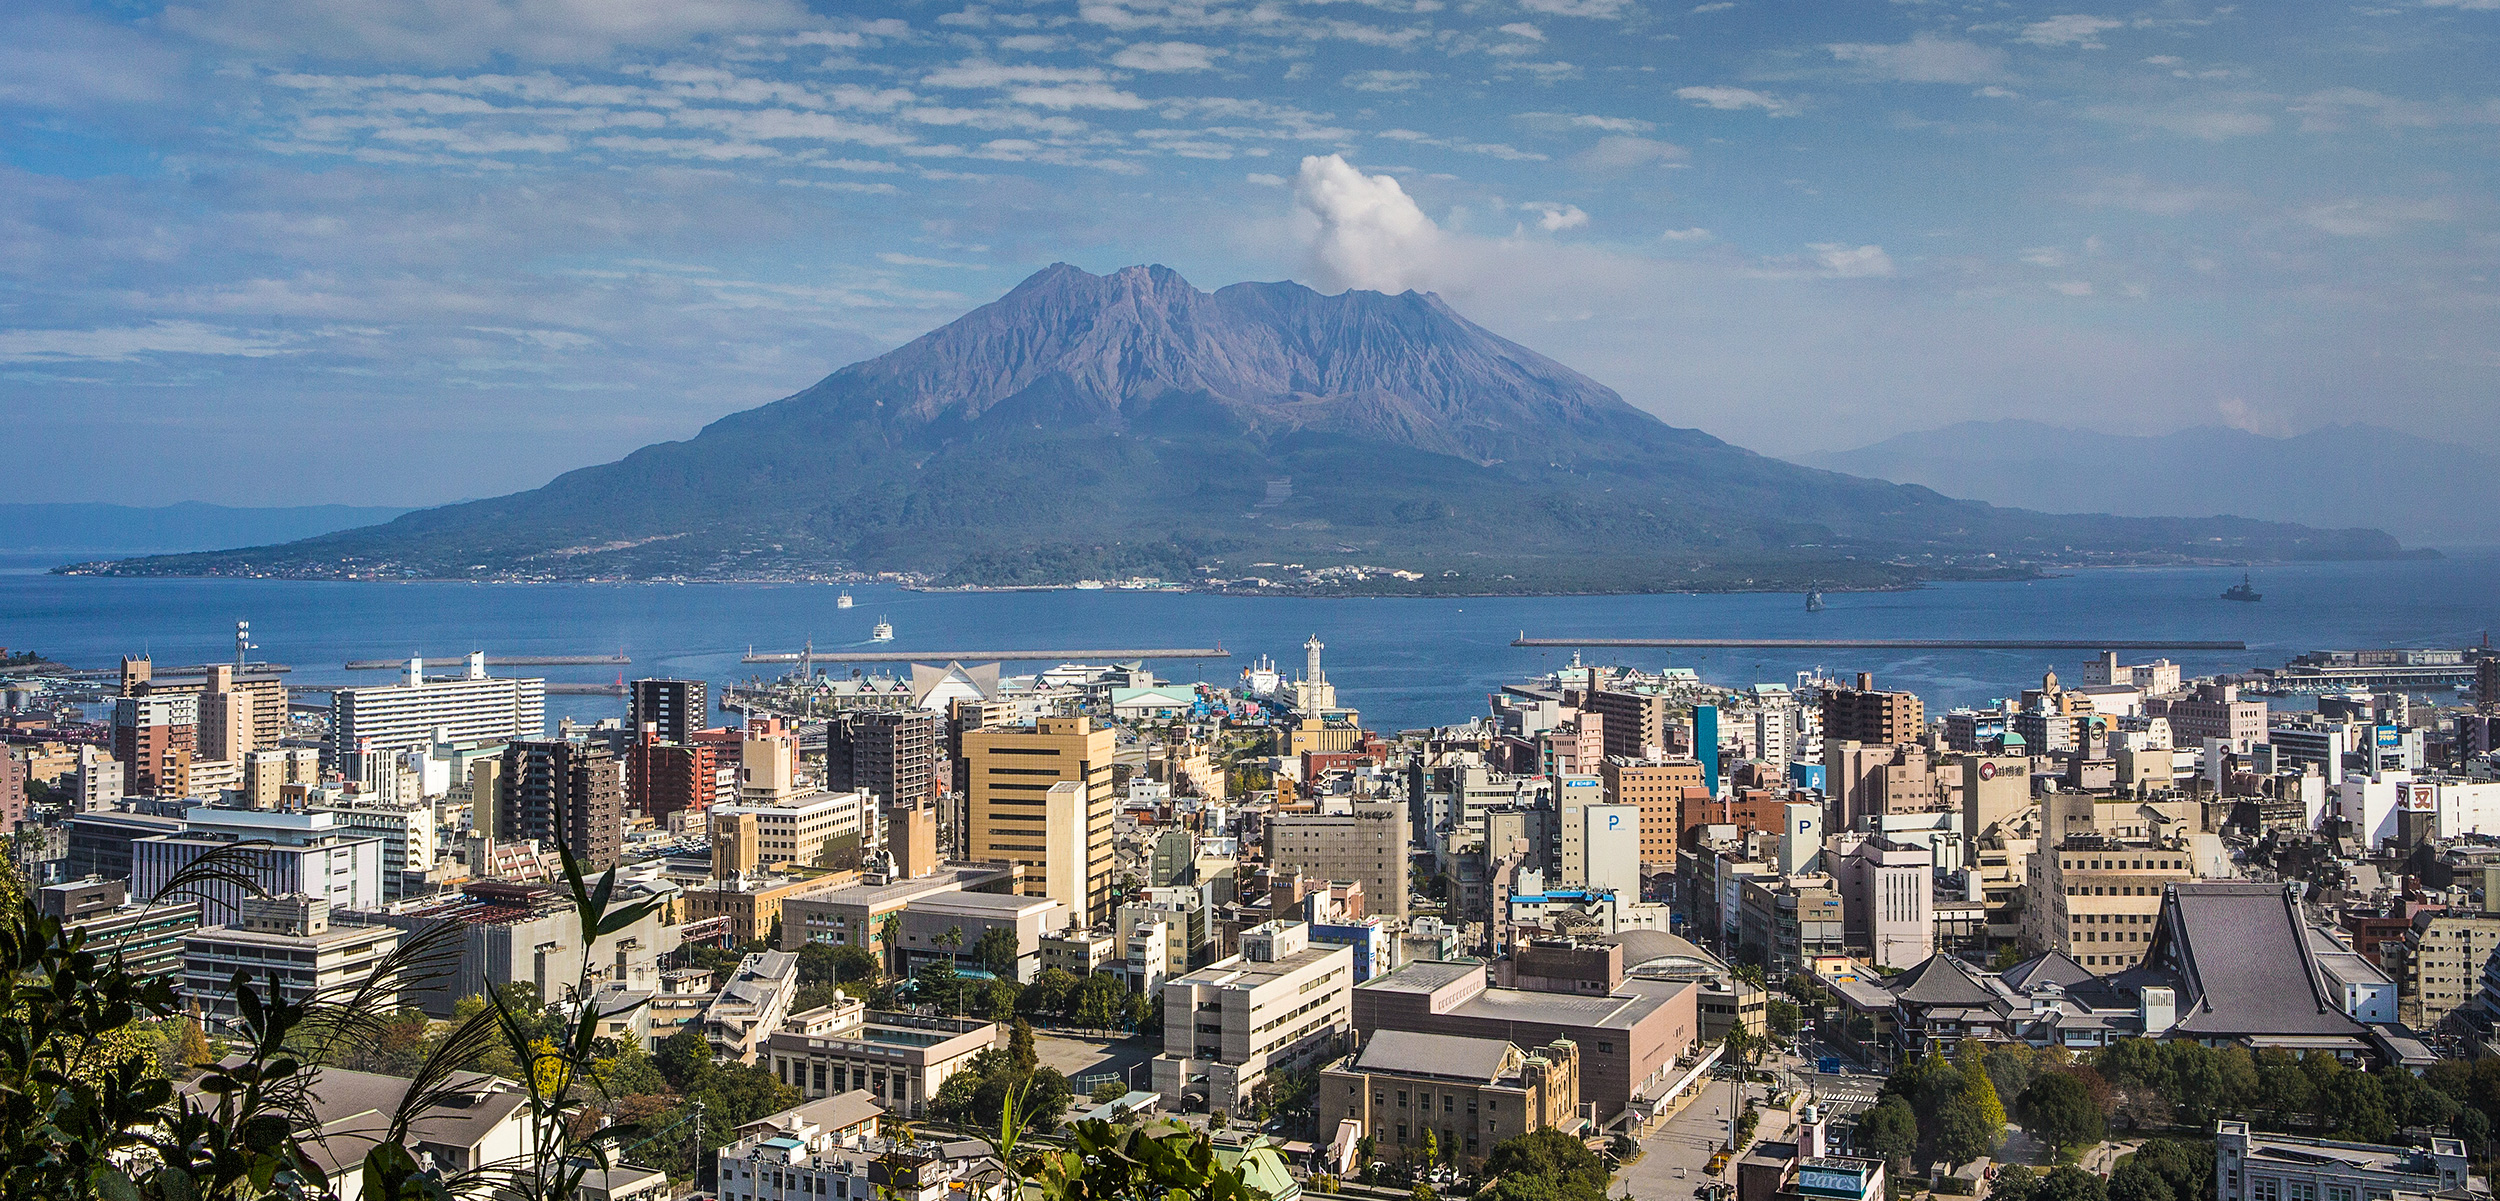 Sakurajima, in southern Japan, is the country’s most active volcano, yet it has a surprising number of people living right next to it. Photo by Jose Fuste Raga/Corbis